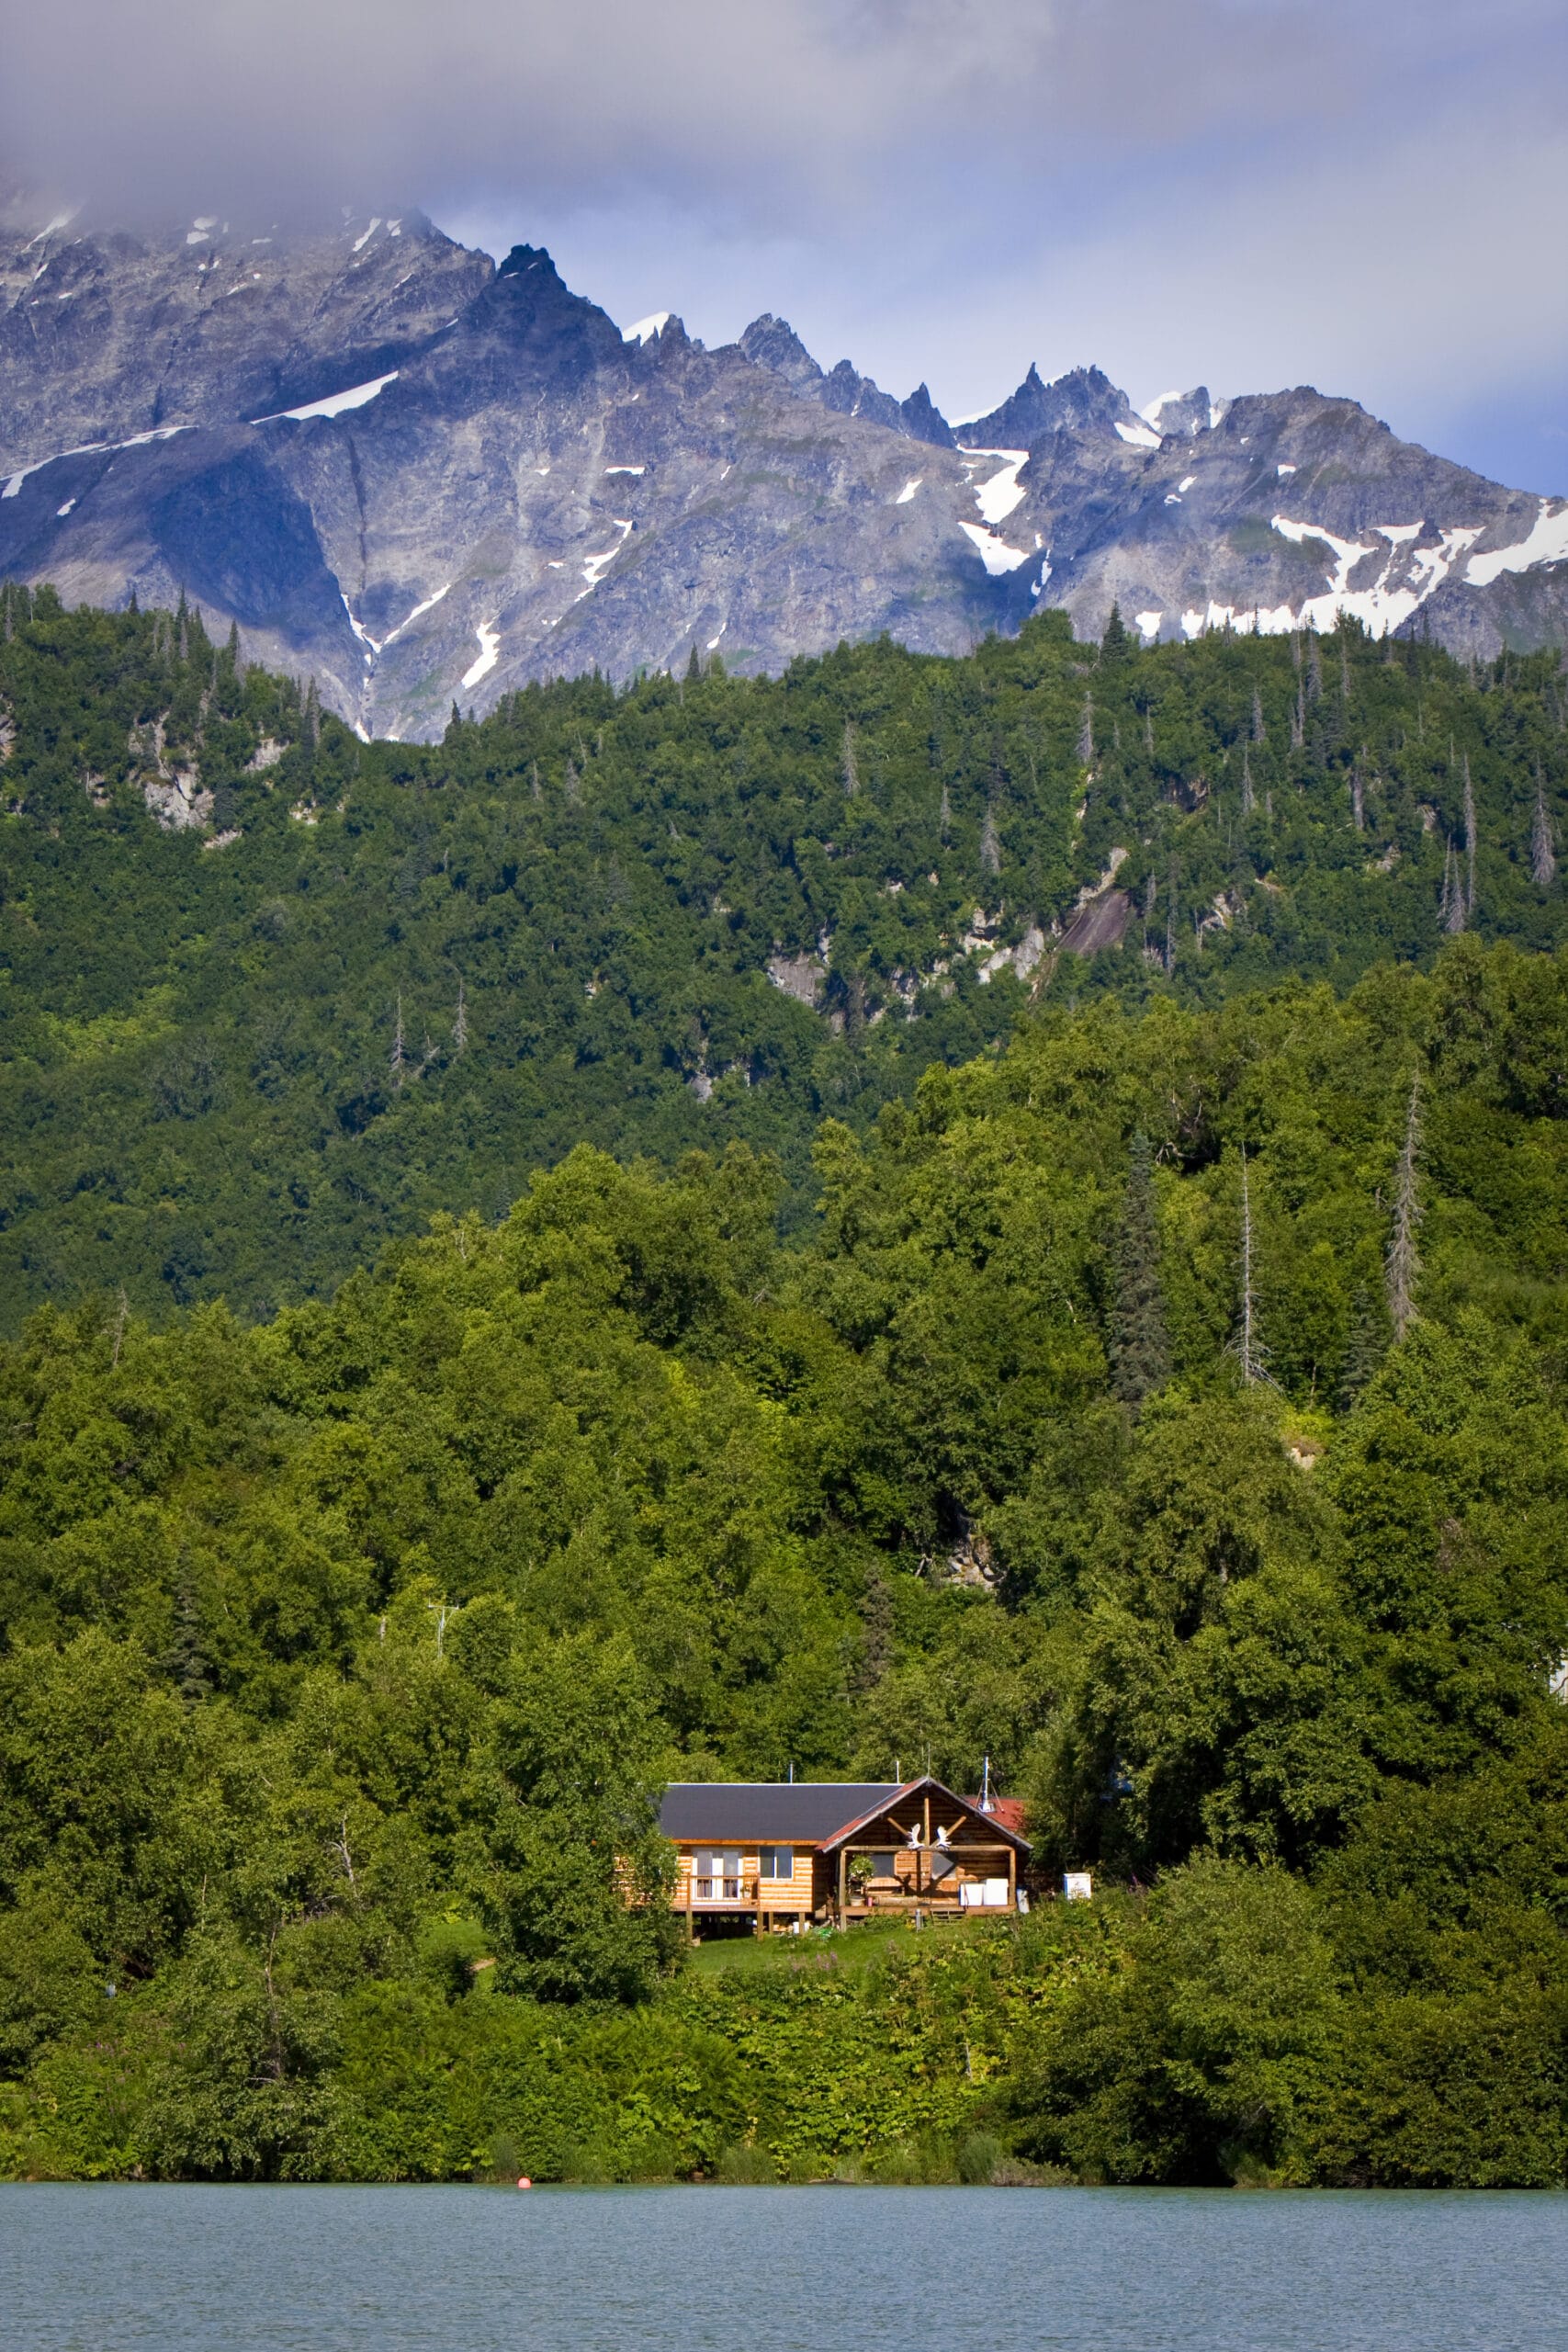 landscape in the front the see, in the middle a lodge among trees and in the background mountains with blue sky